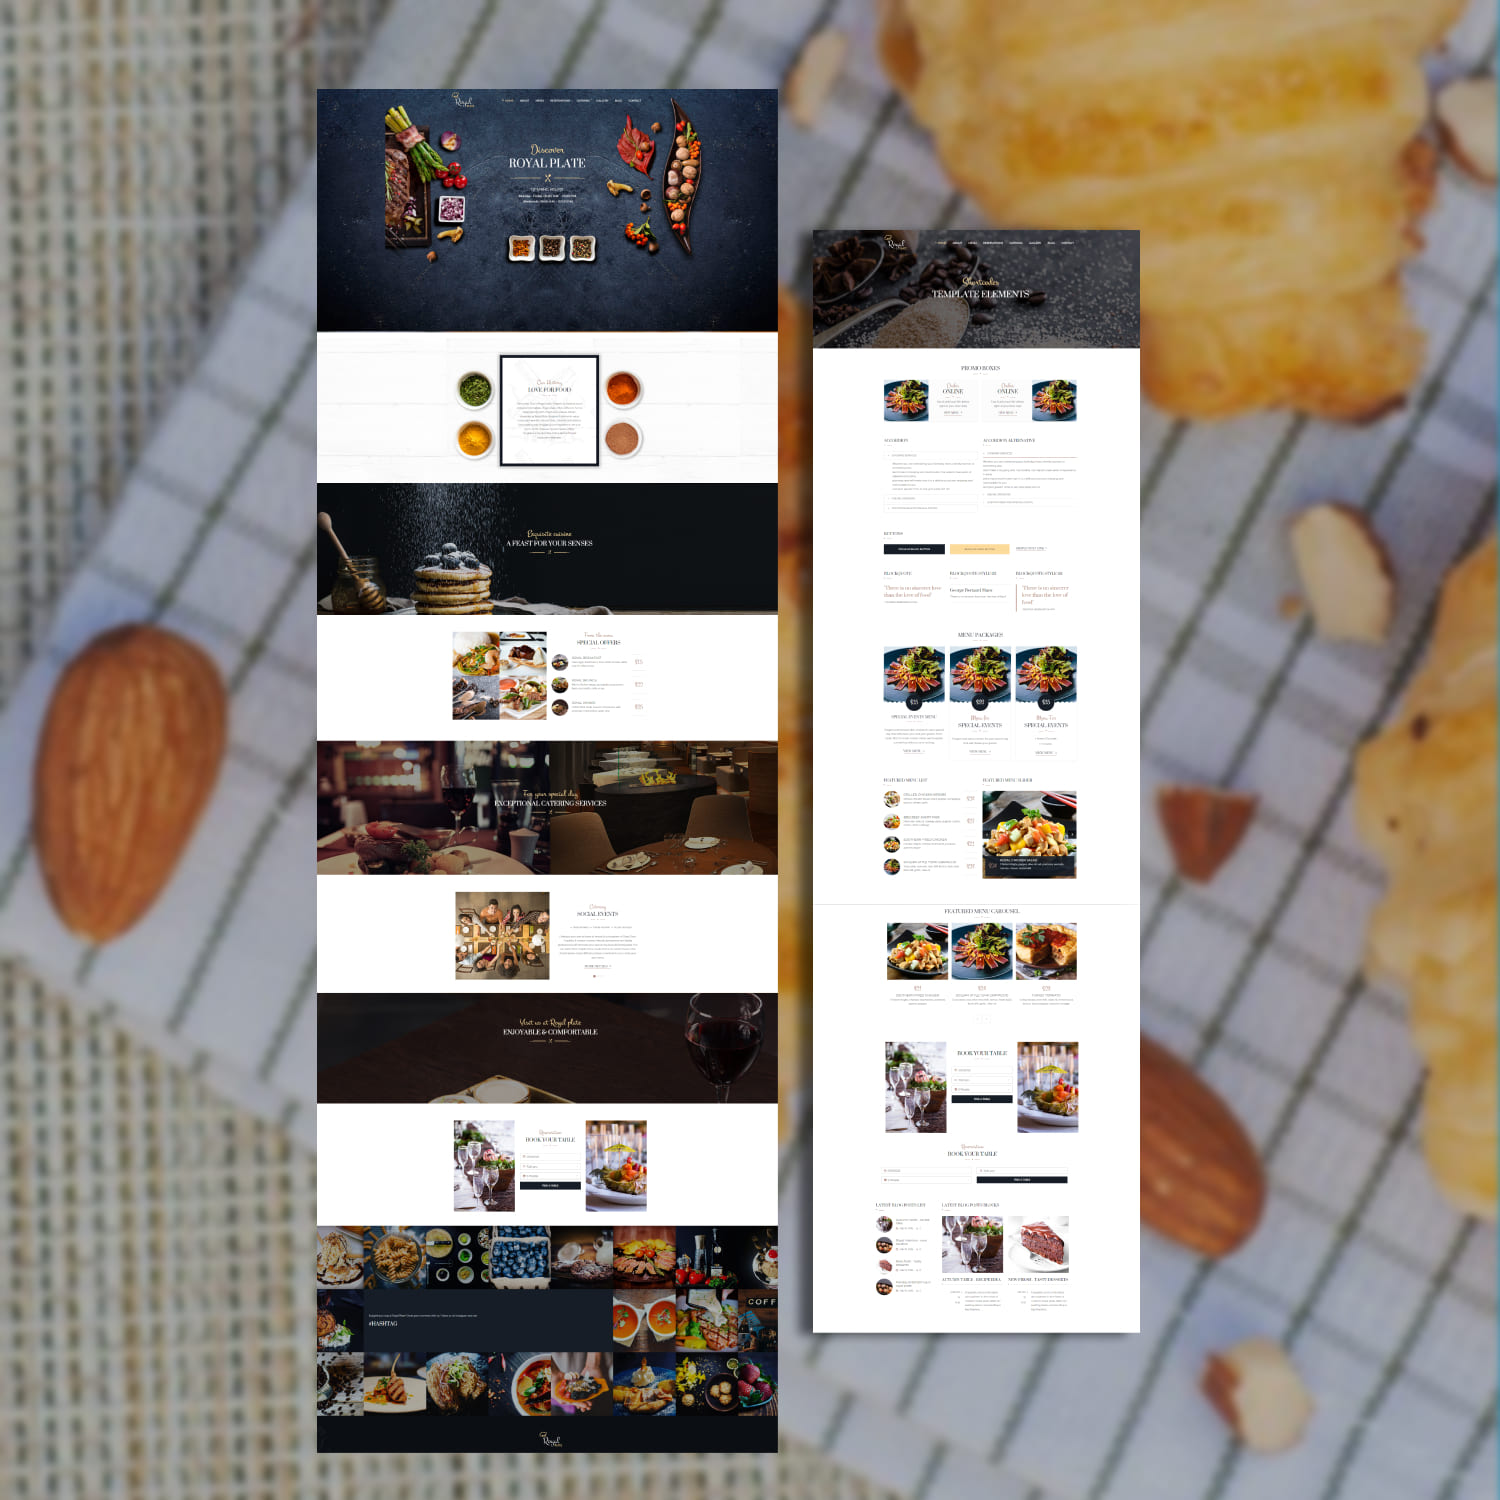 Menu for pecial events of the Royal Plate - Restaurant and Catering WordPress Theme.